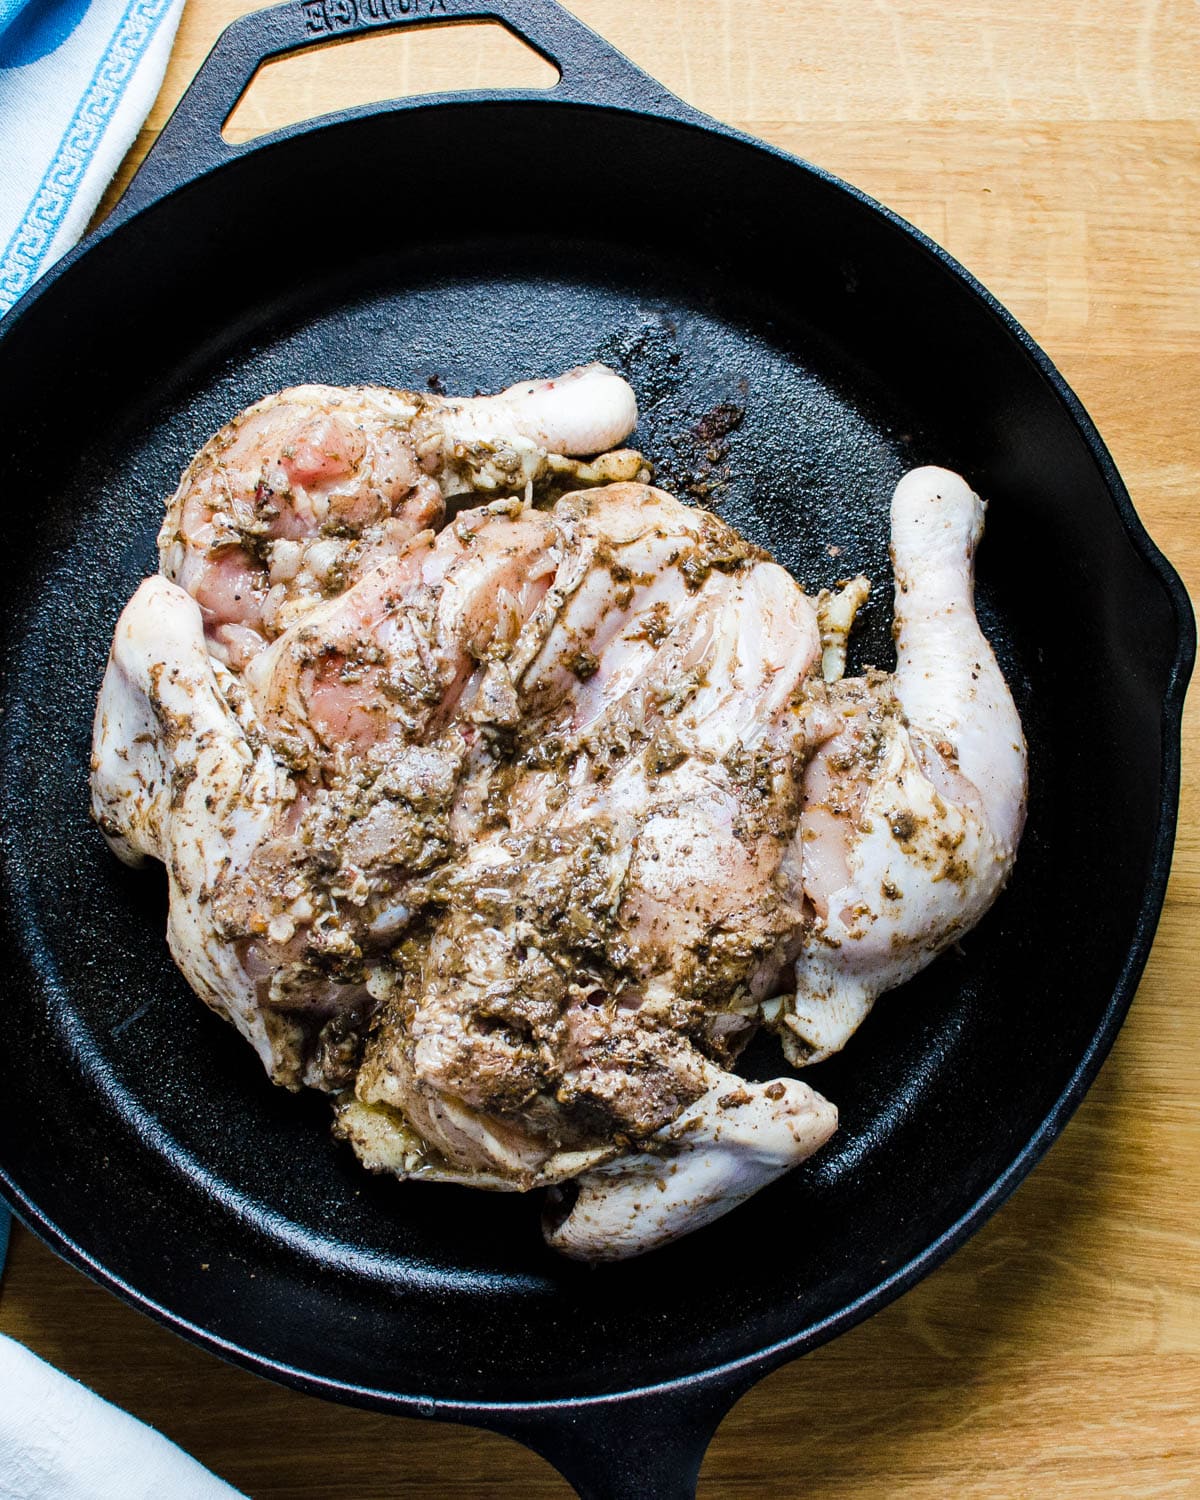 Placing the seasoned spatchcock chicken in a hot cast iron skillet.